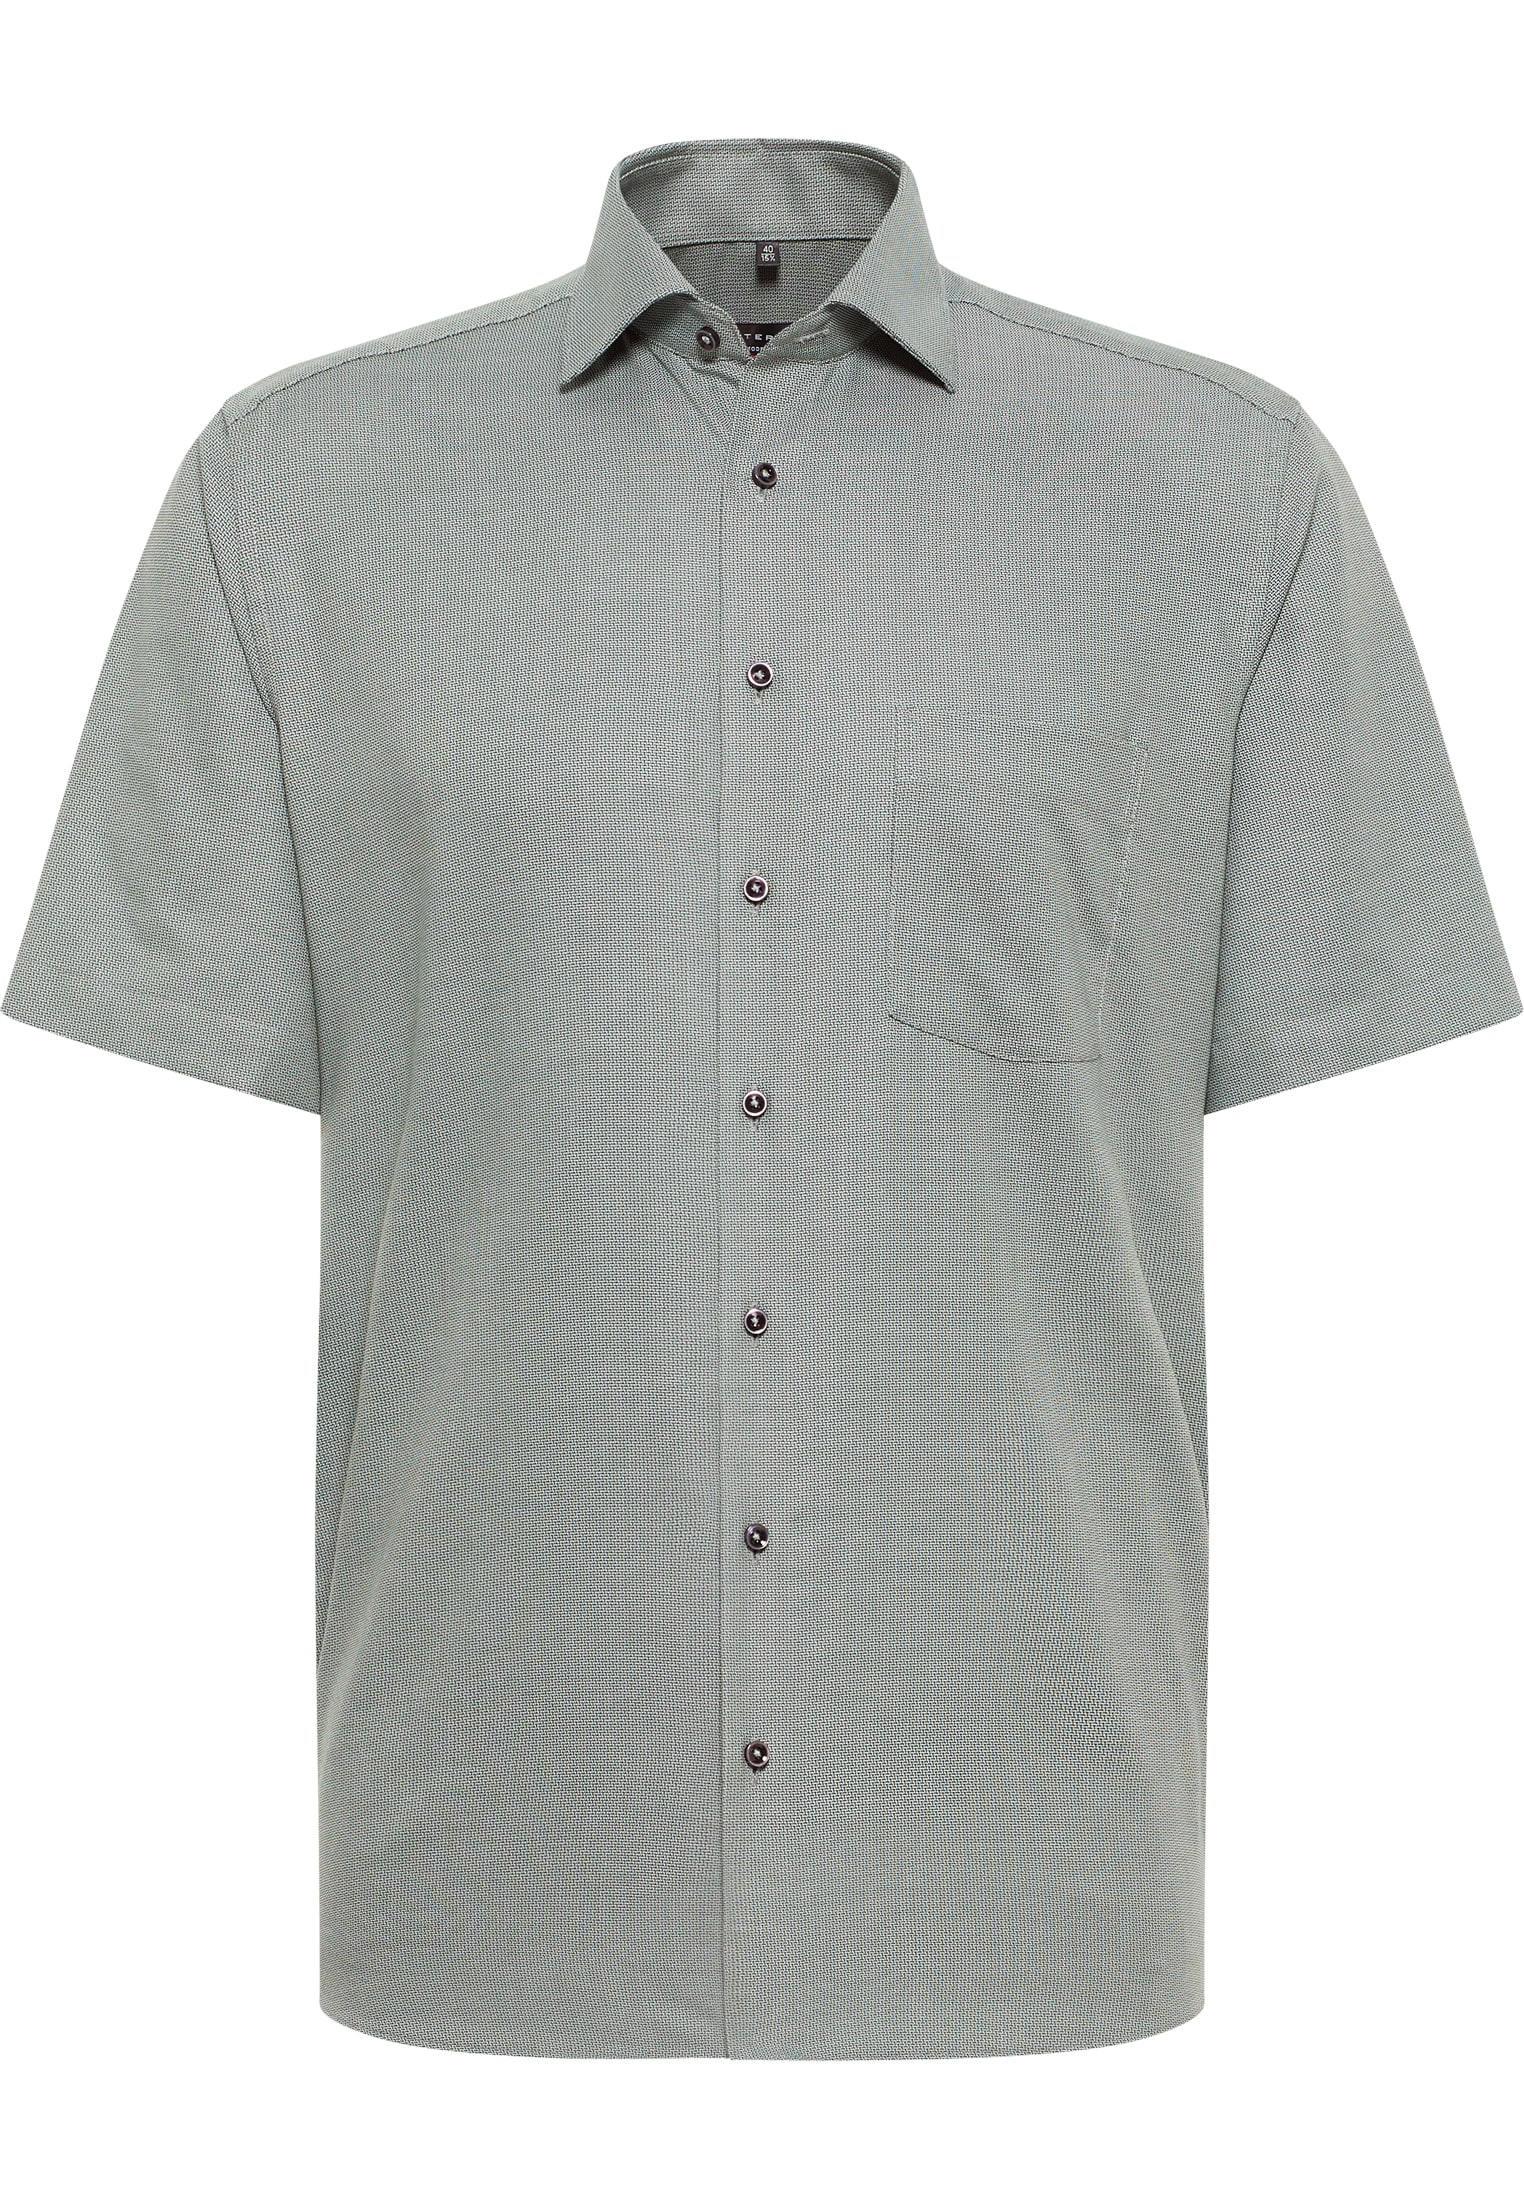 MODERN FIT Shirt in emerald structured